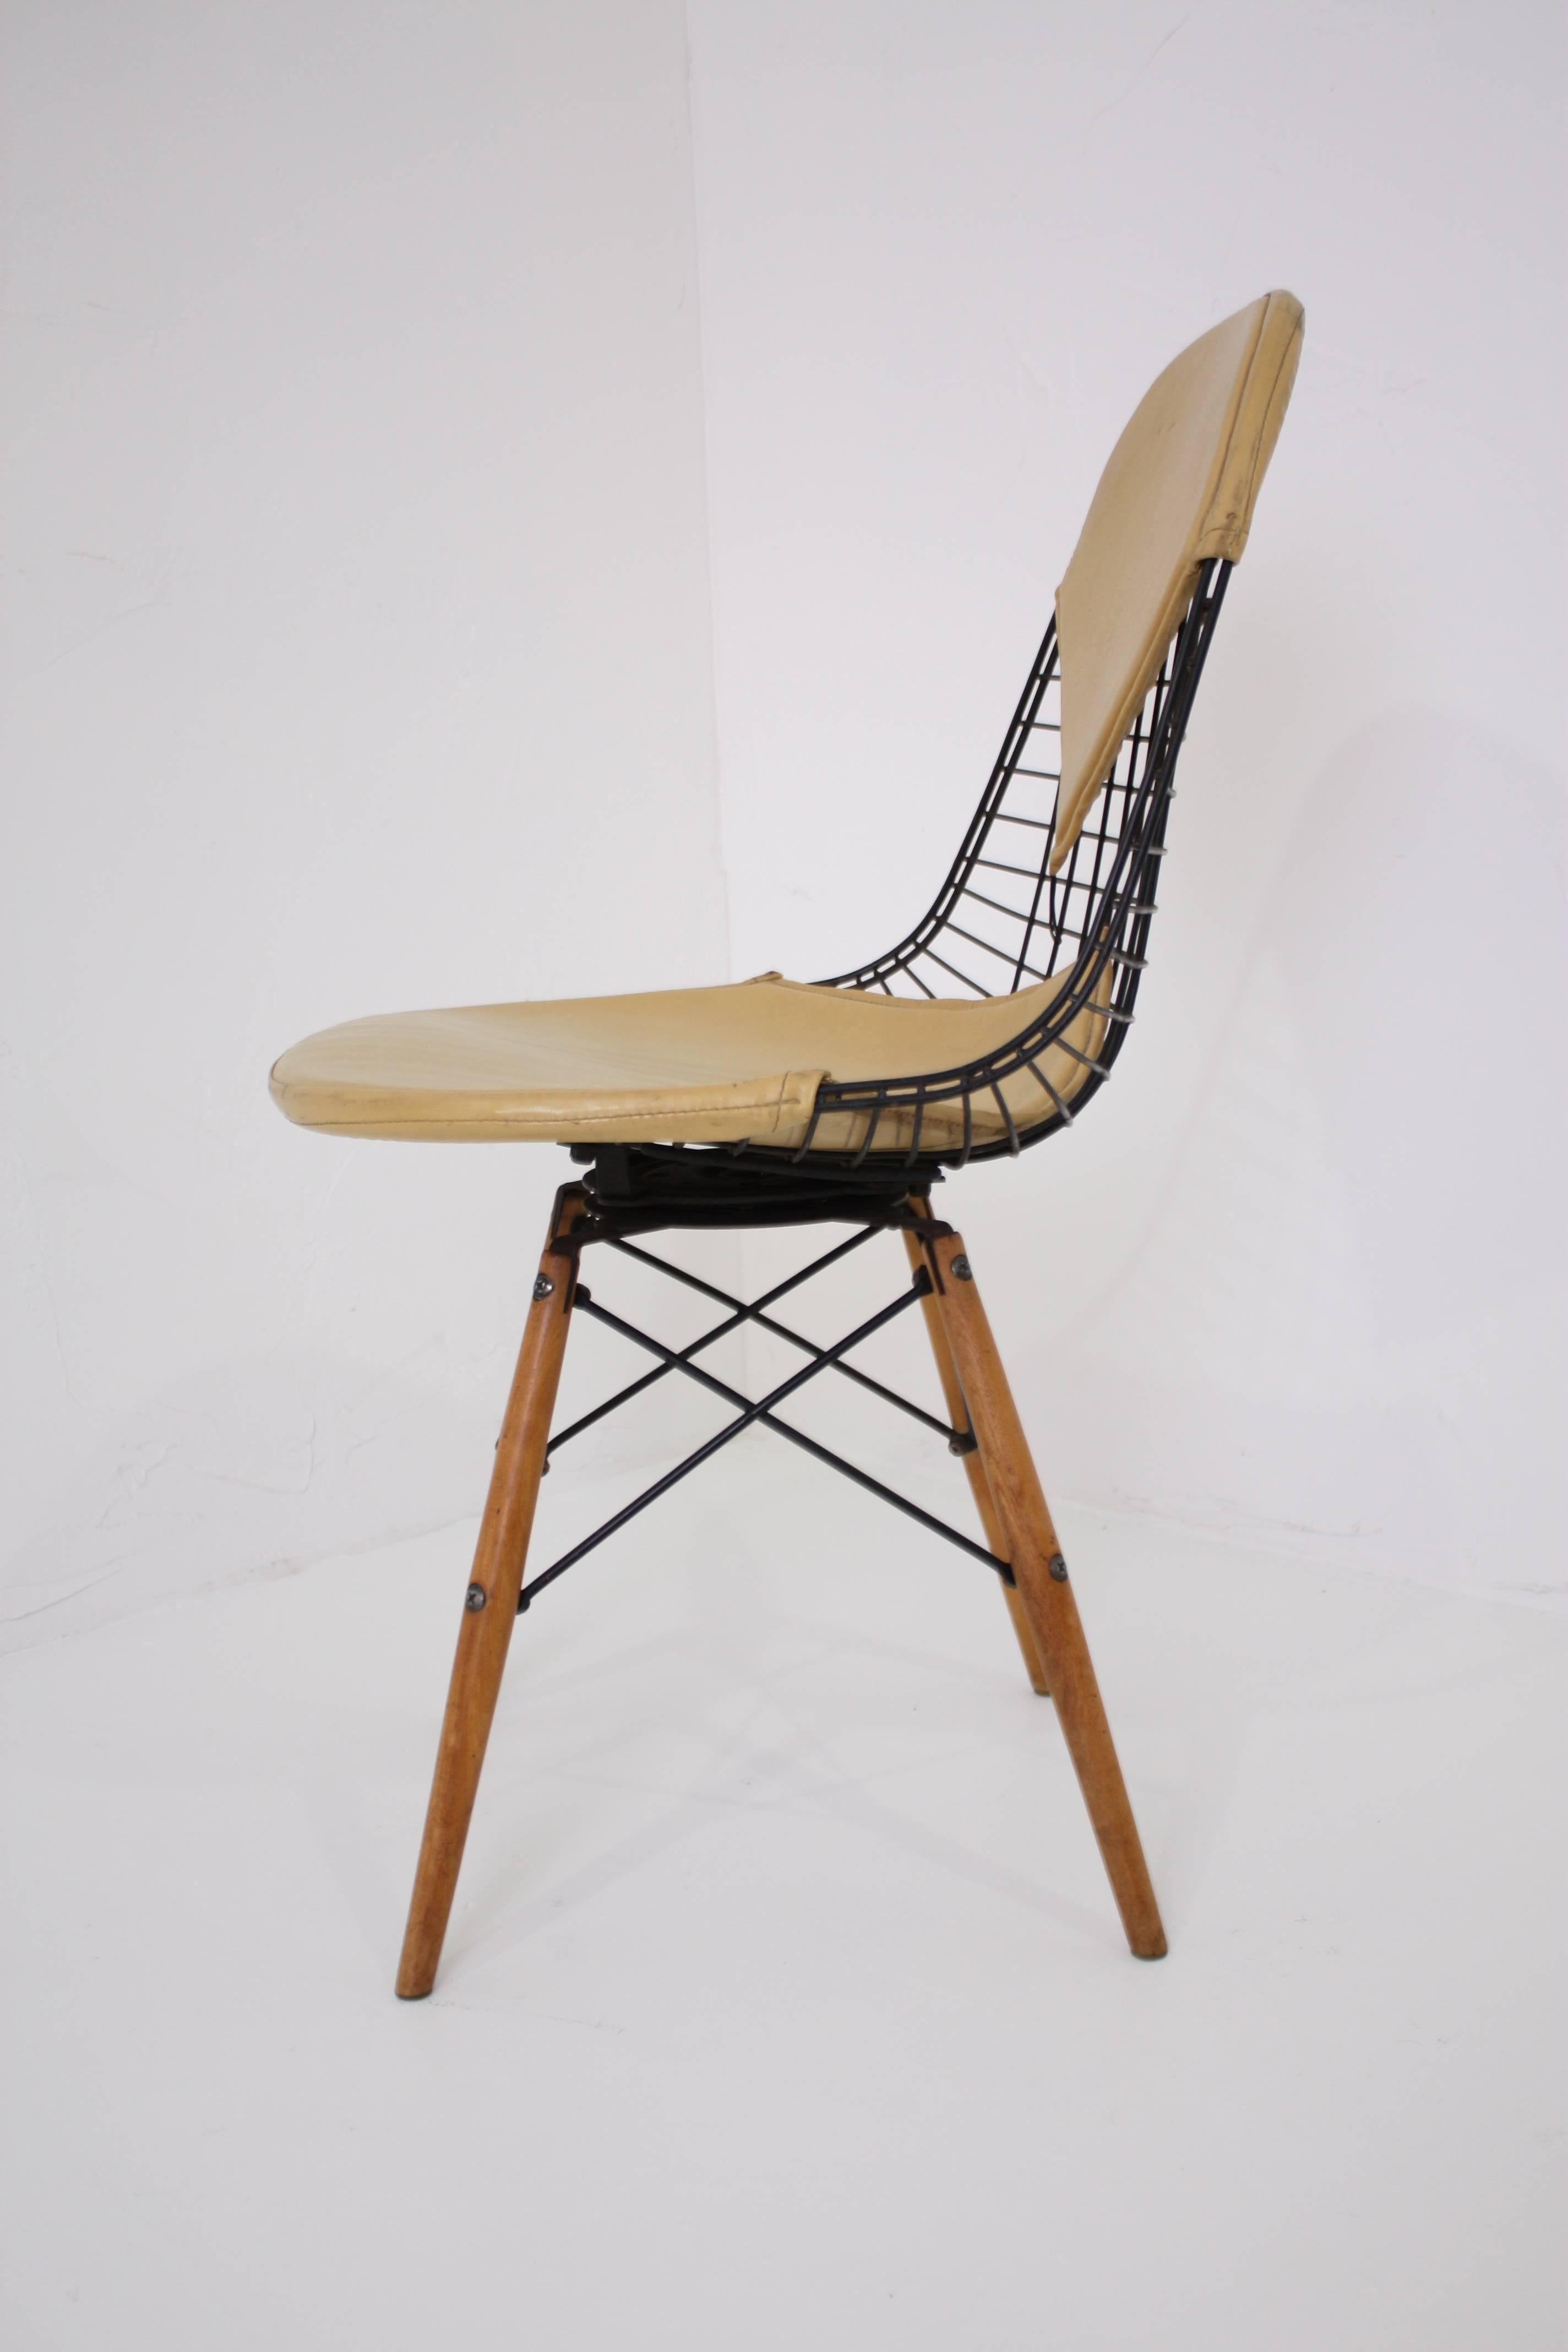 Early desk model PKW swivel chair with birch legs by Charles and Ray Eames for Herman Miller.